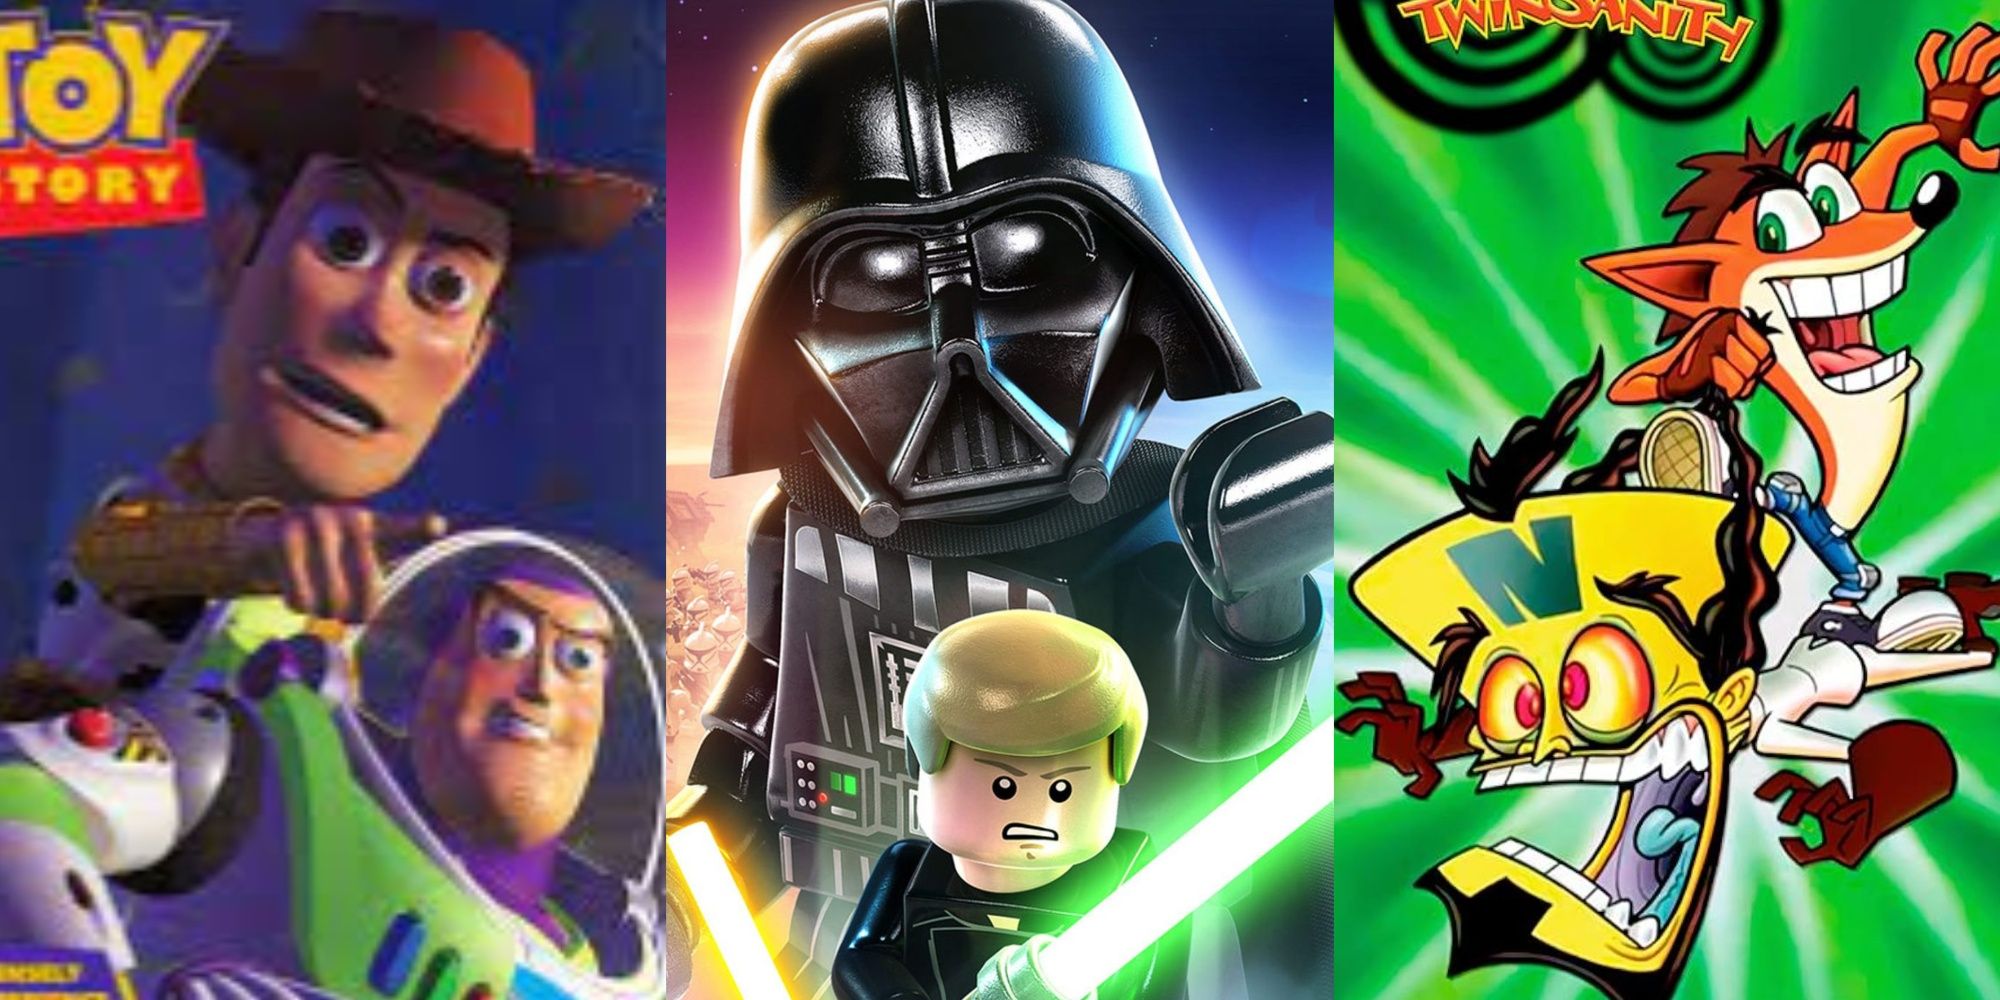 Woody, Buzz Lightyear, Darth Vader, Luke Skywalker, Crash Bandicoot, and Dr. Neo Cortex next to one another in a collage